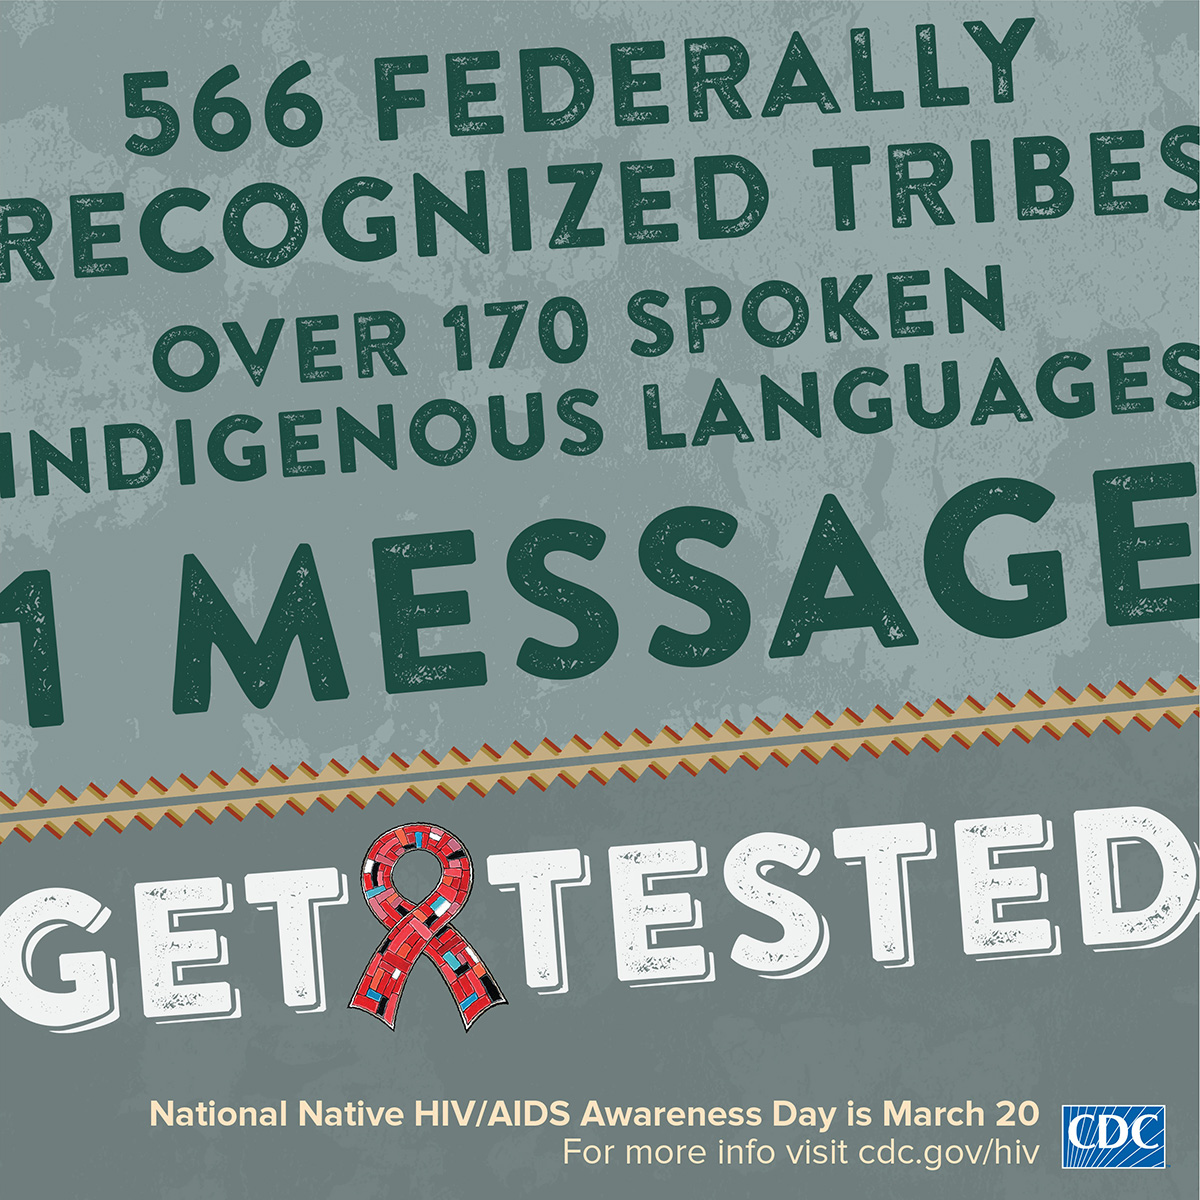 566 federally recognized tribes, over 170 spoken indigigenous languages, 1 message : Get Tested